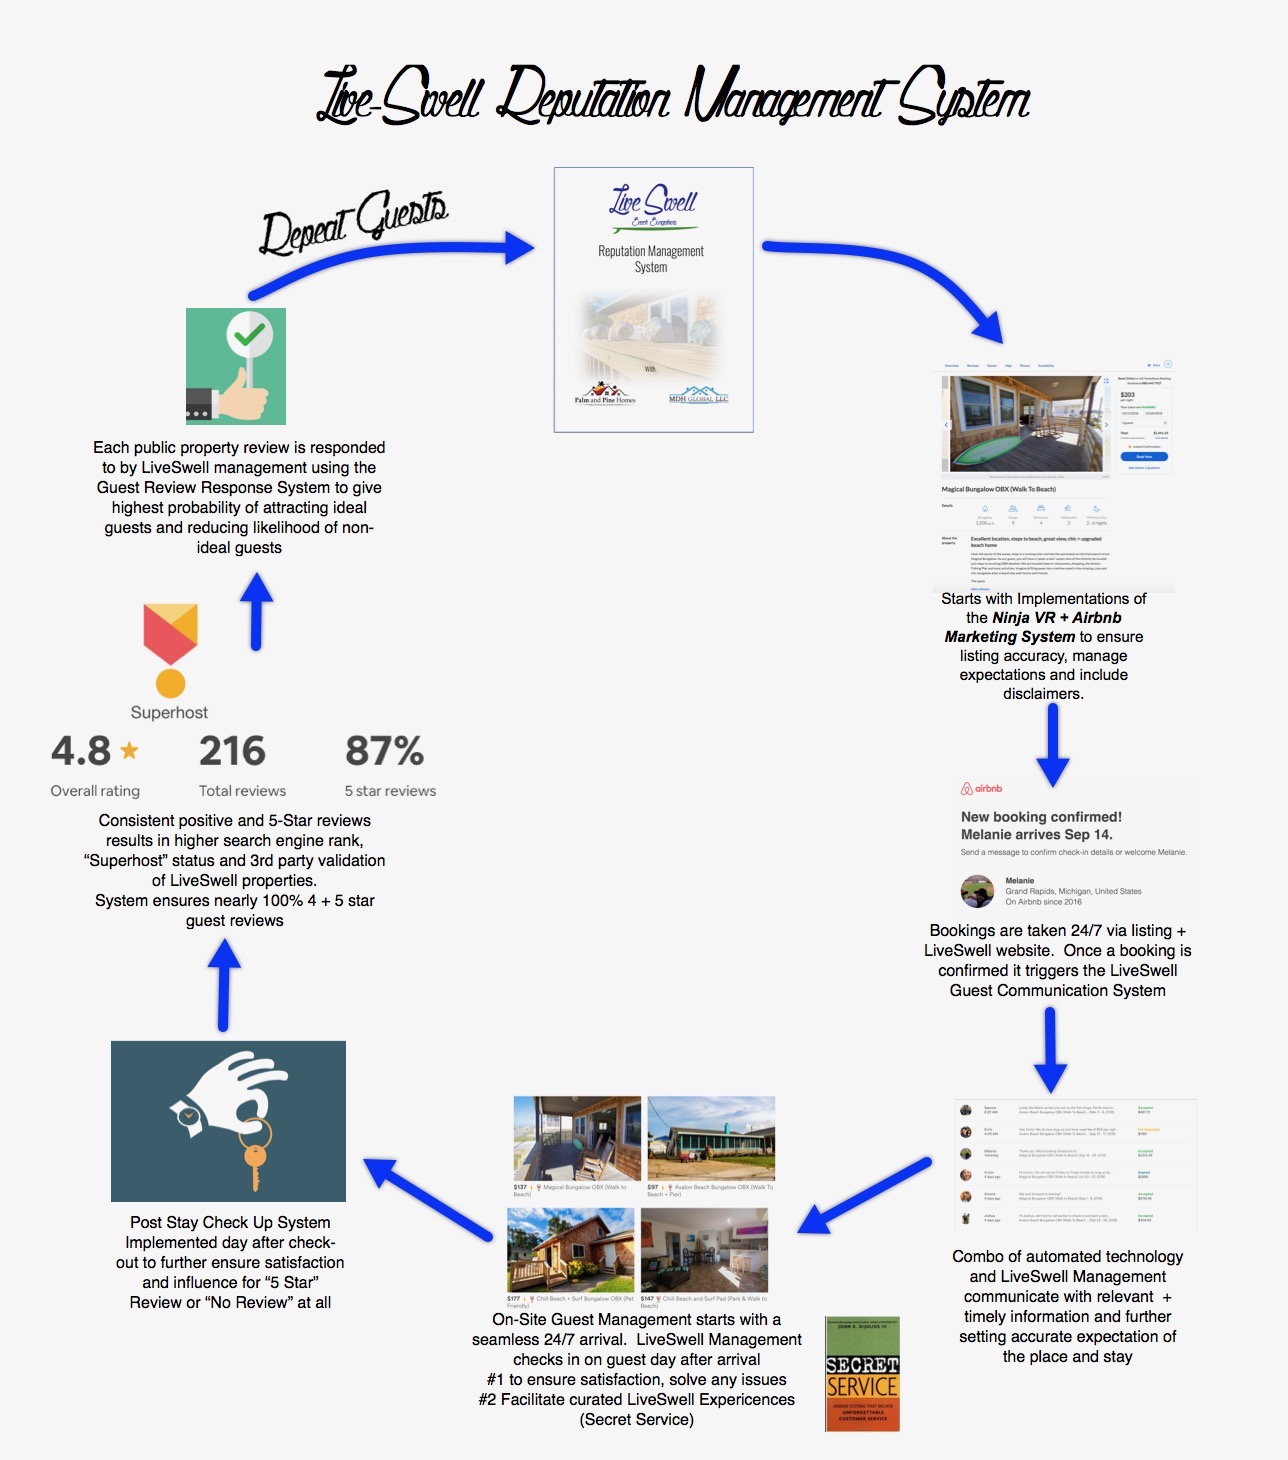 Live Swell Reputation Management System Infographic Airbnb Host Business Model